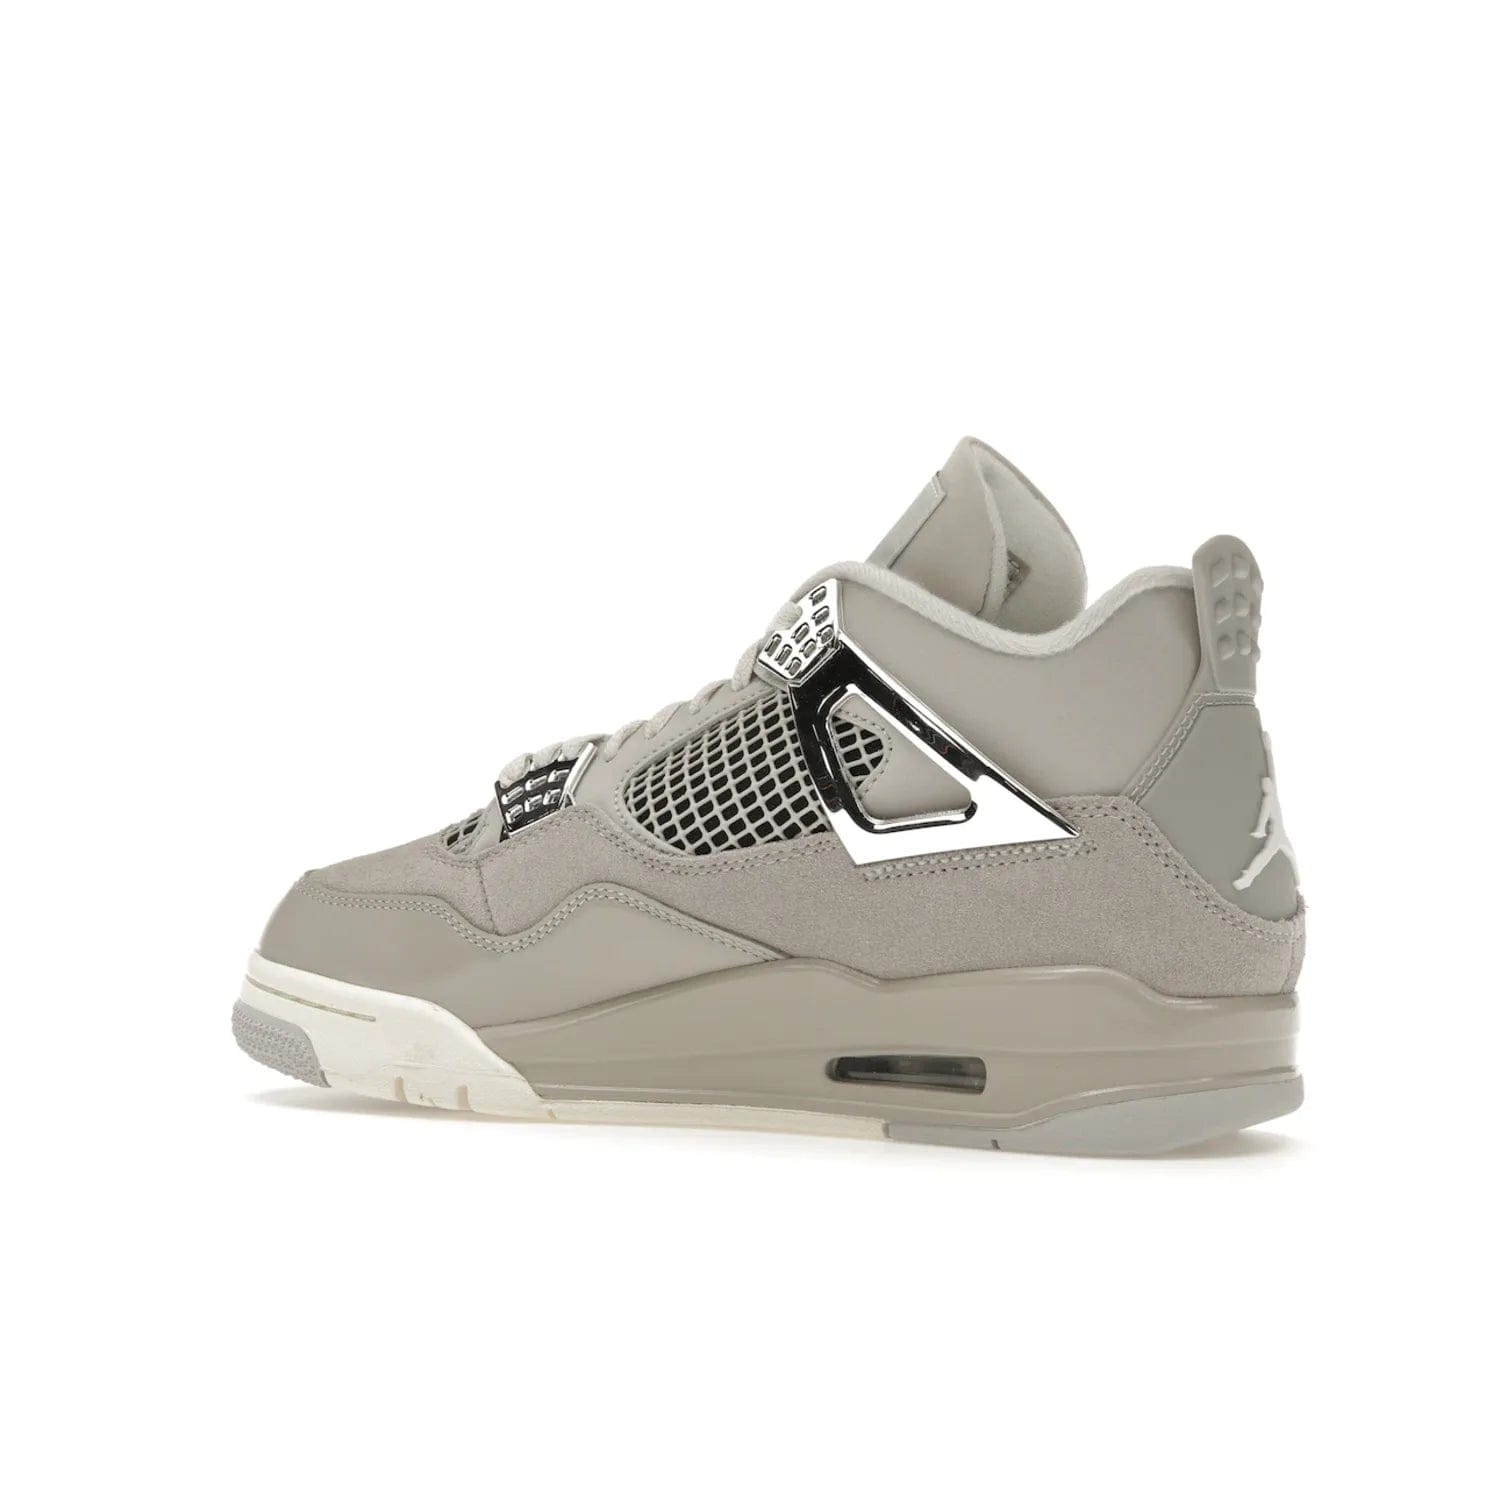 Jordan 4 Retro Frozen Moments (Women's) - Image 22 - Only at www.BallersClubKickz.com - The Jordan 4 Retro Frozen Moments is a stylish blend of classic design elements and modern tones. Featuring suede and leather overlays in a light iron-ore, sail, neutral grey, black, and metallic silver colorway. Get this iconic high-performance sneaker for $210.